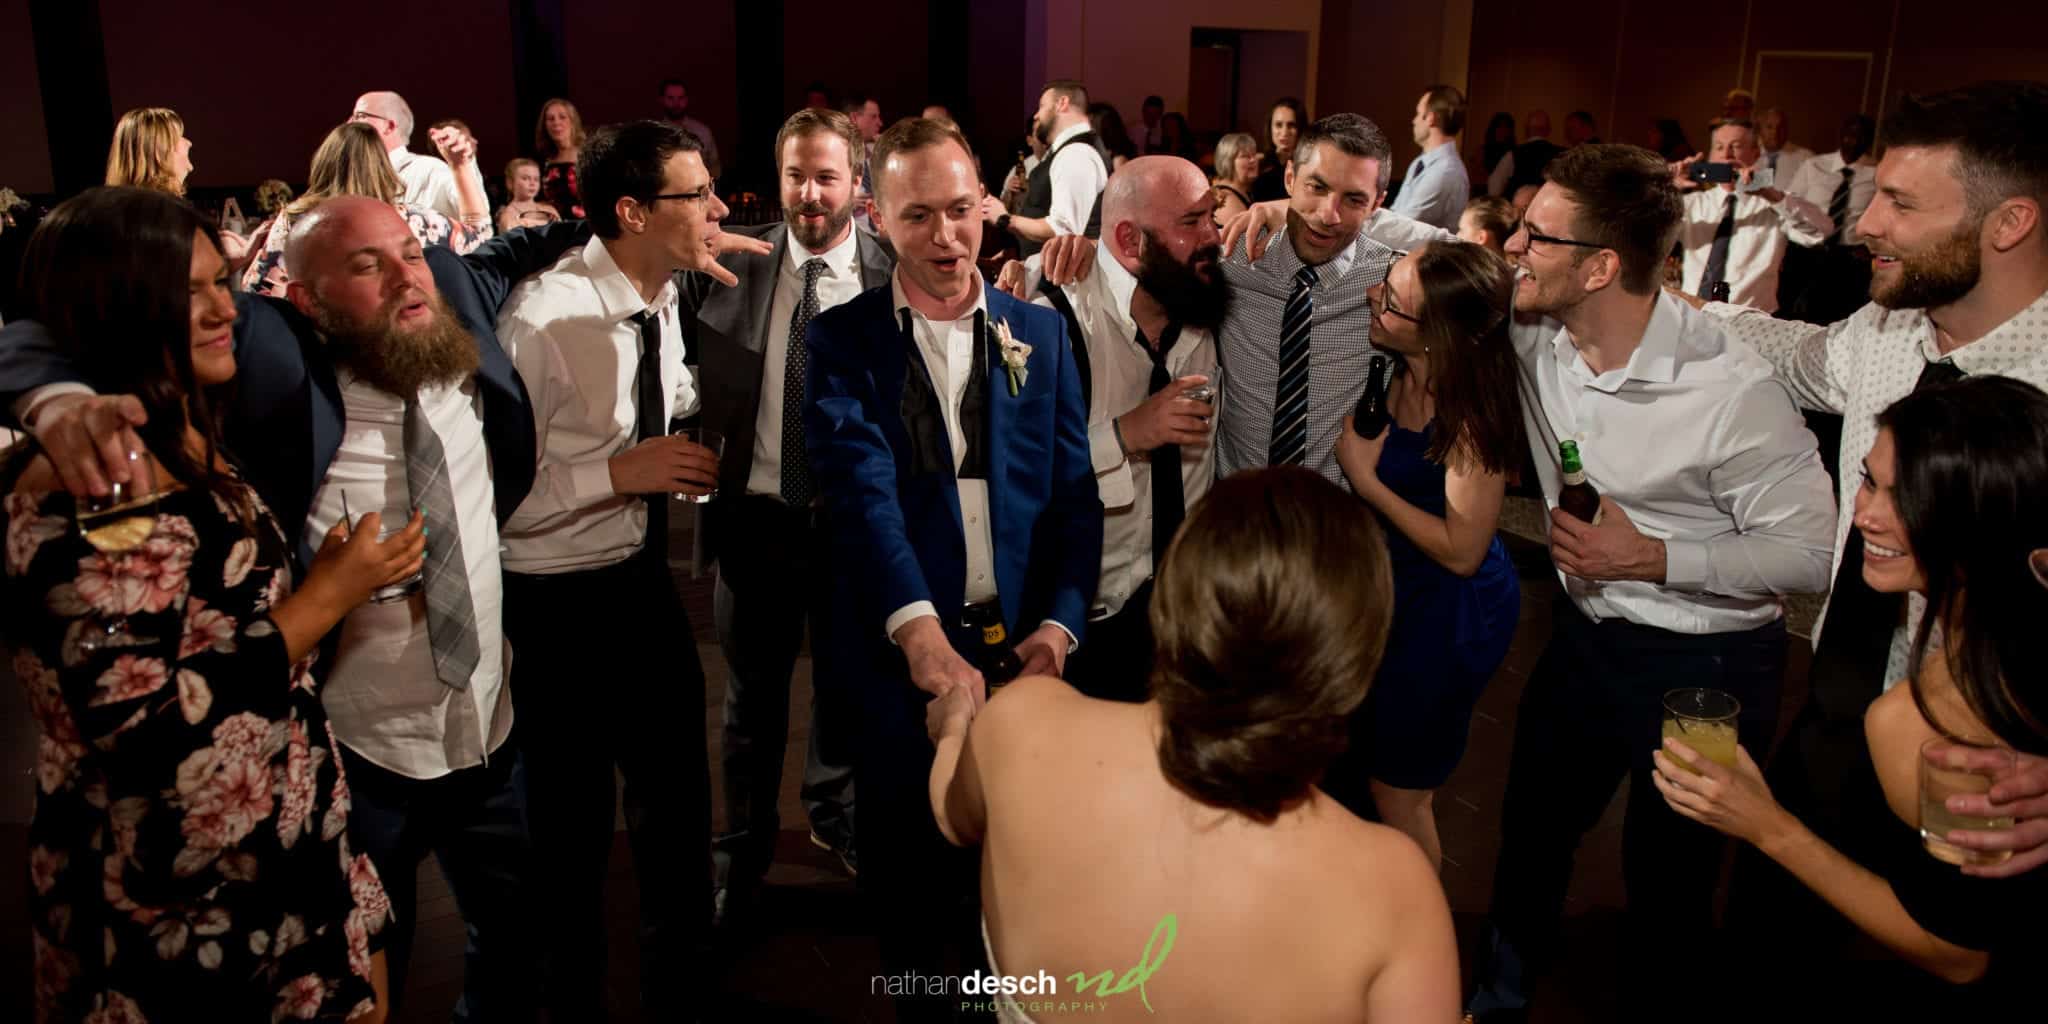 Phoenixville Foundry Wedding Pictures